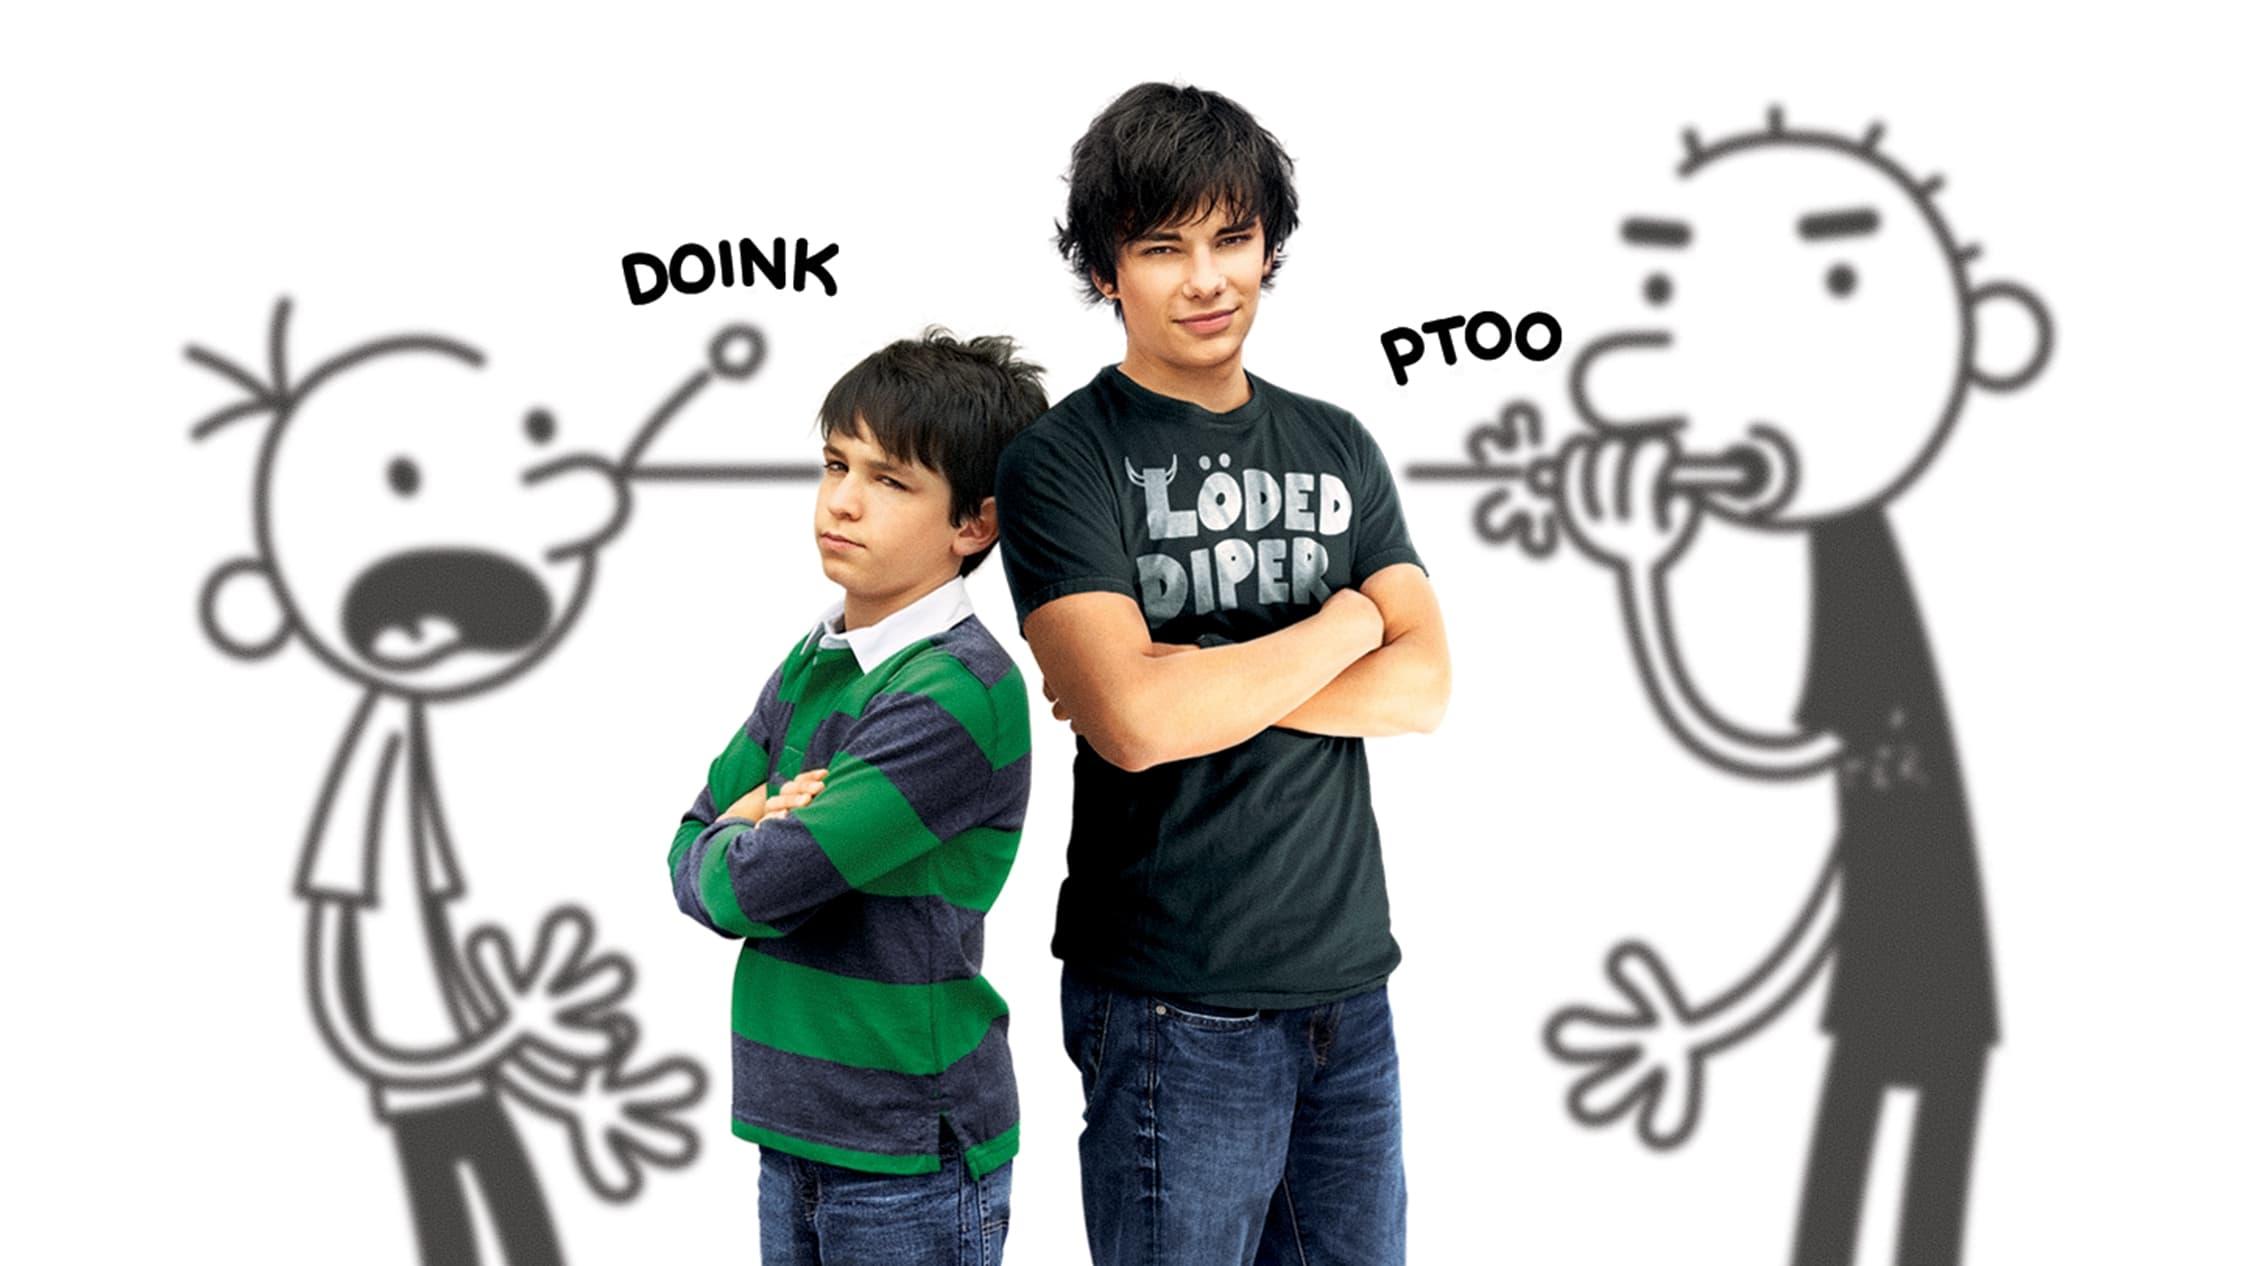 Diary of a Wimpy Kid: Rodrick Rules backdrop